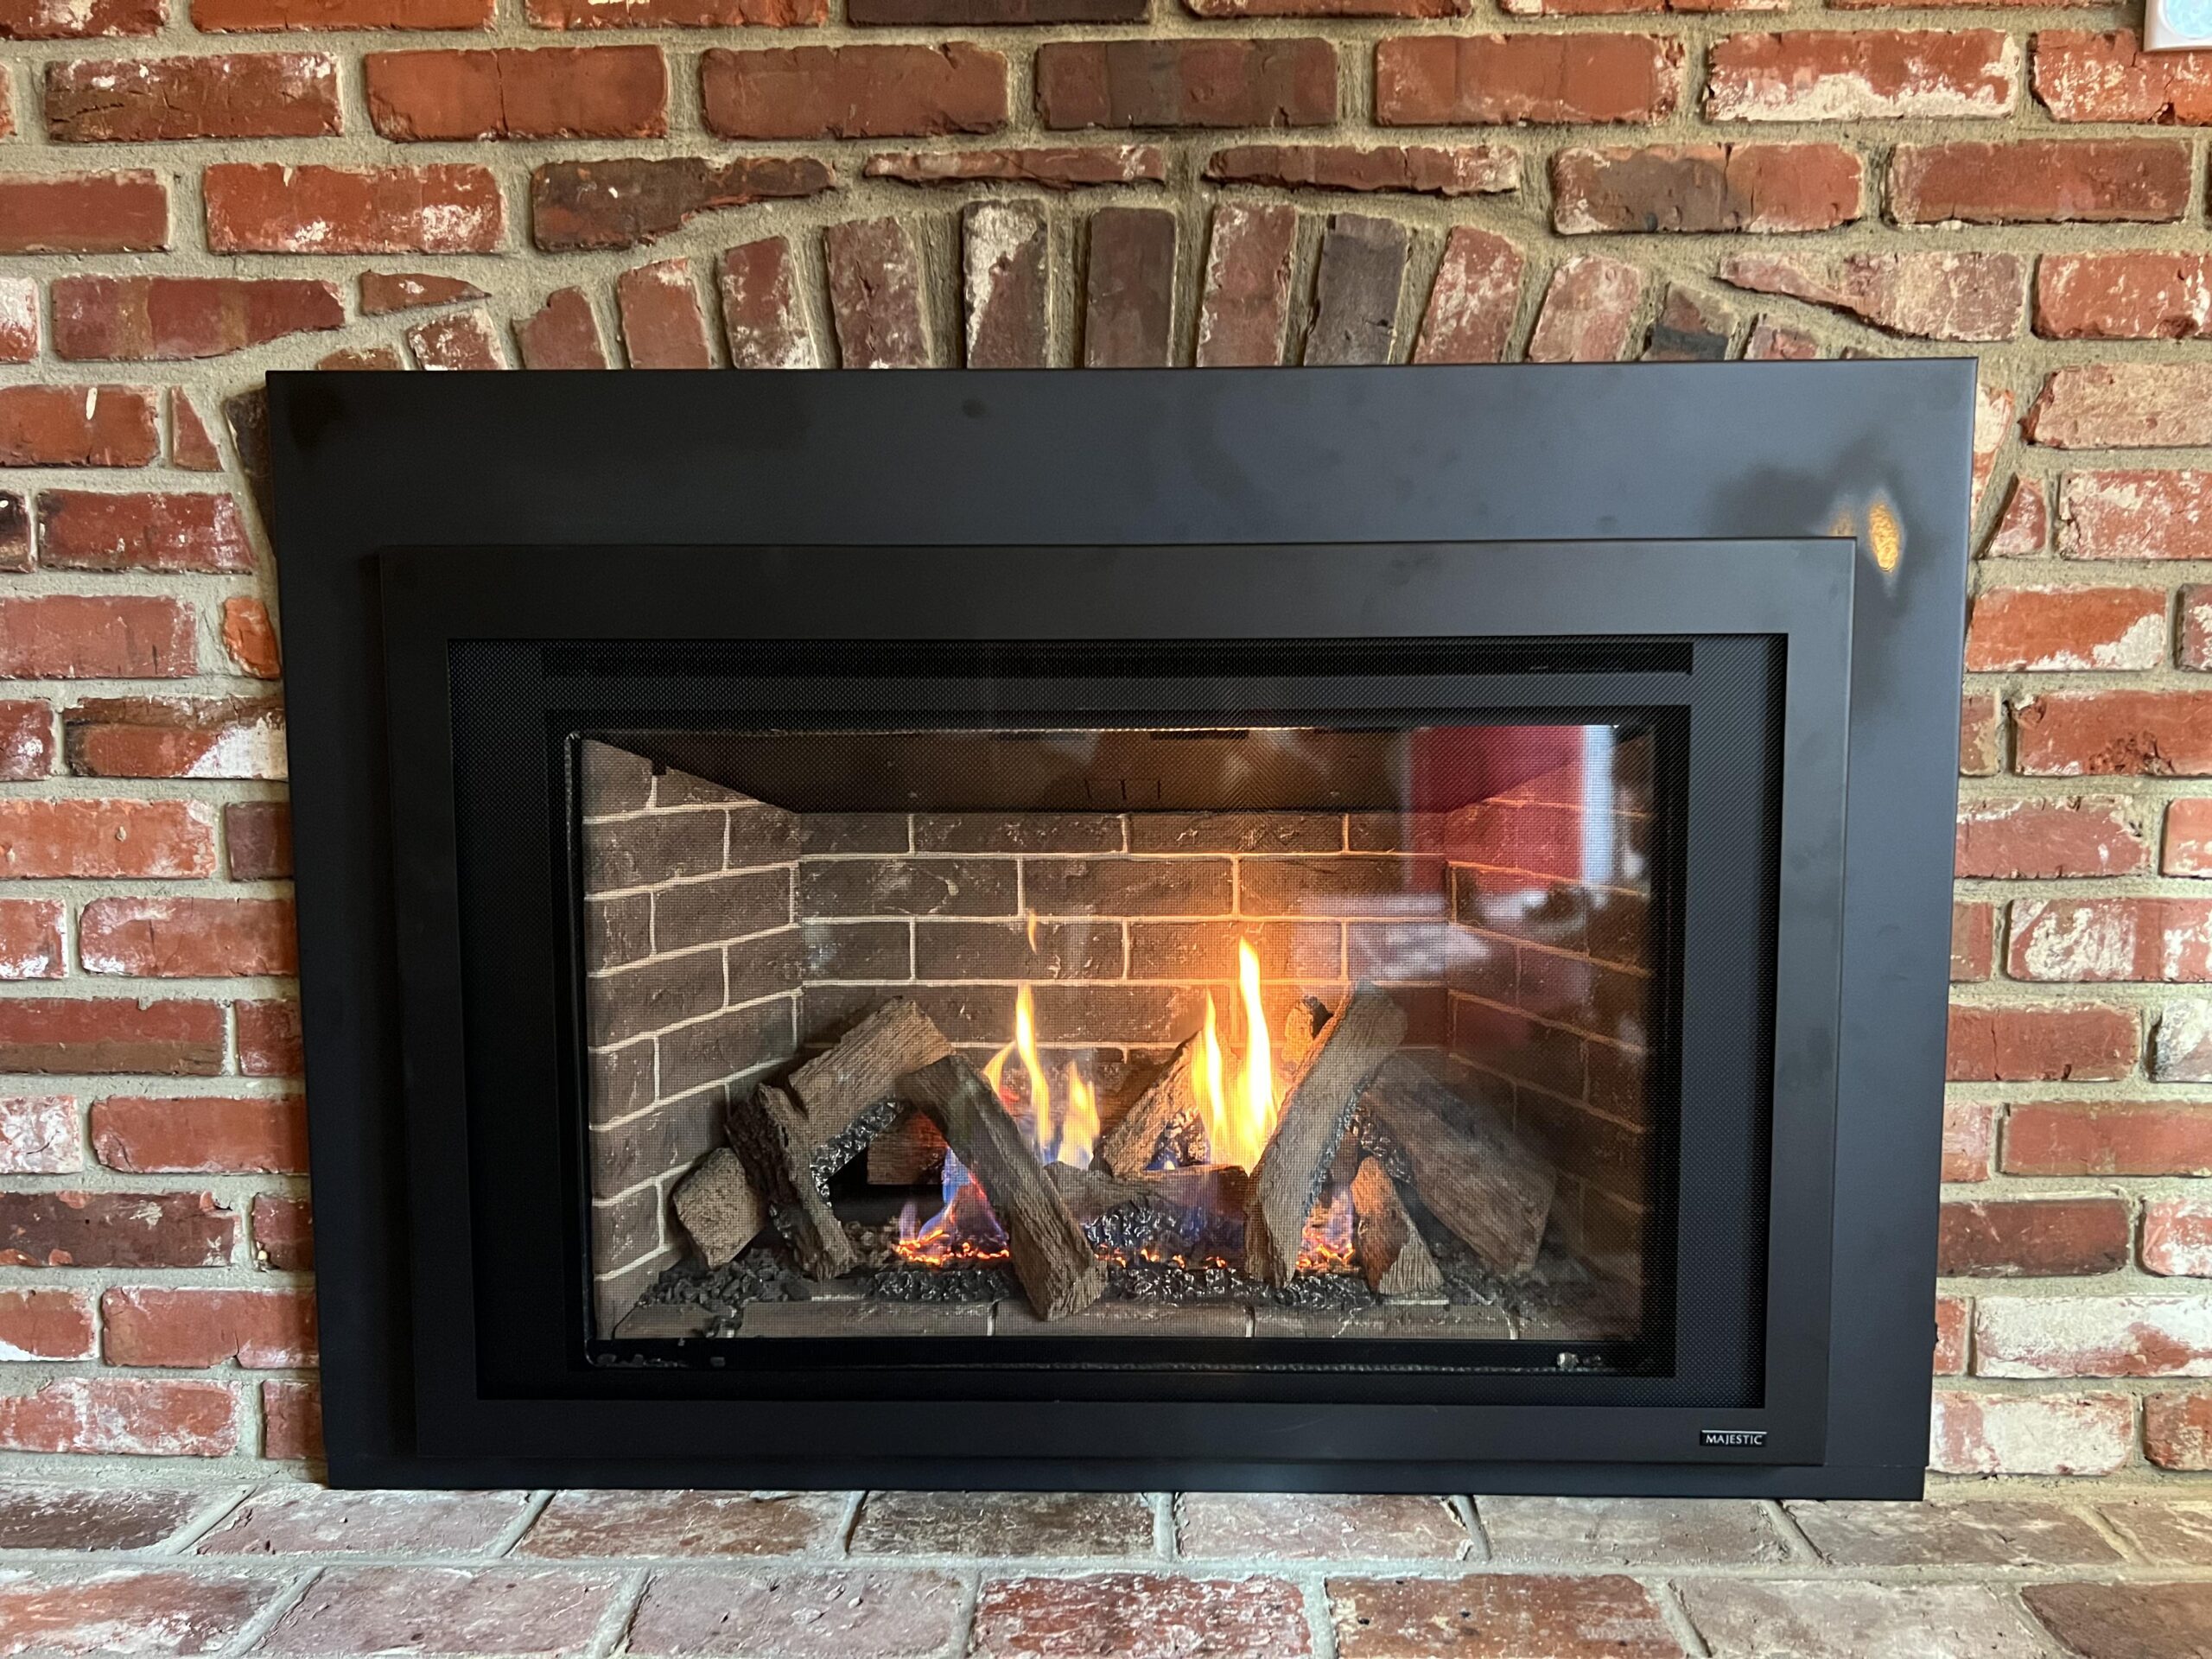 gas fireplace insert in red brick fireplace